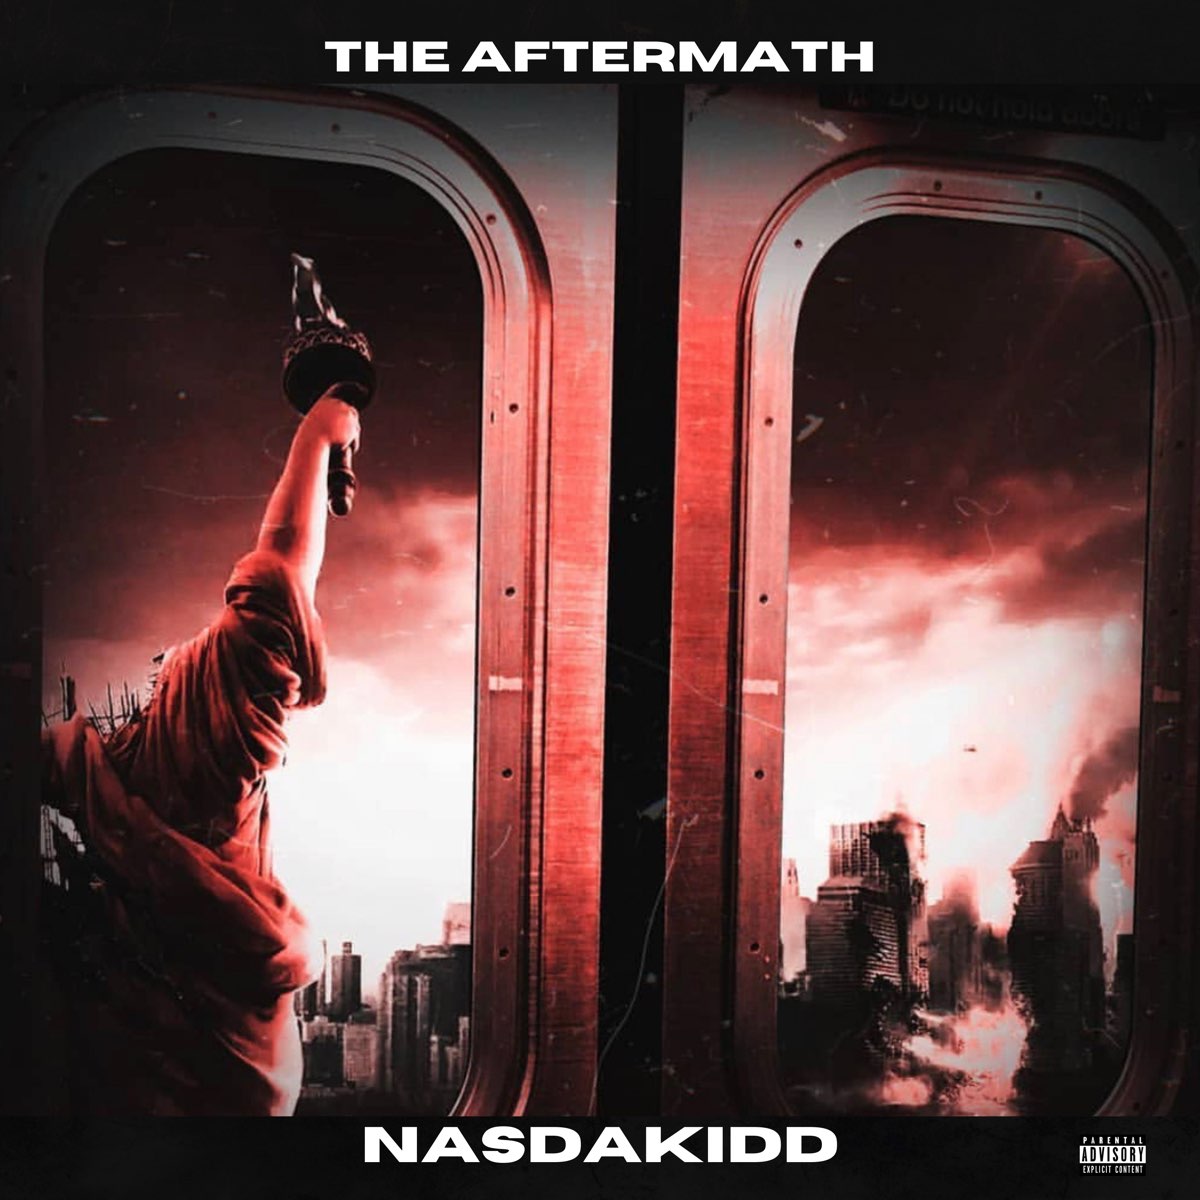 The Aftermath - EP by Nas Da Kidd on Apple Music